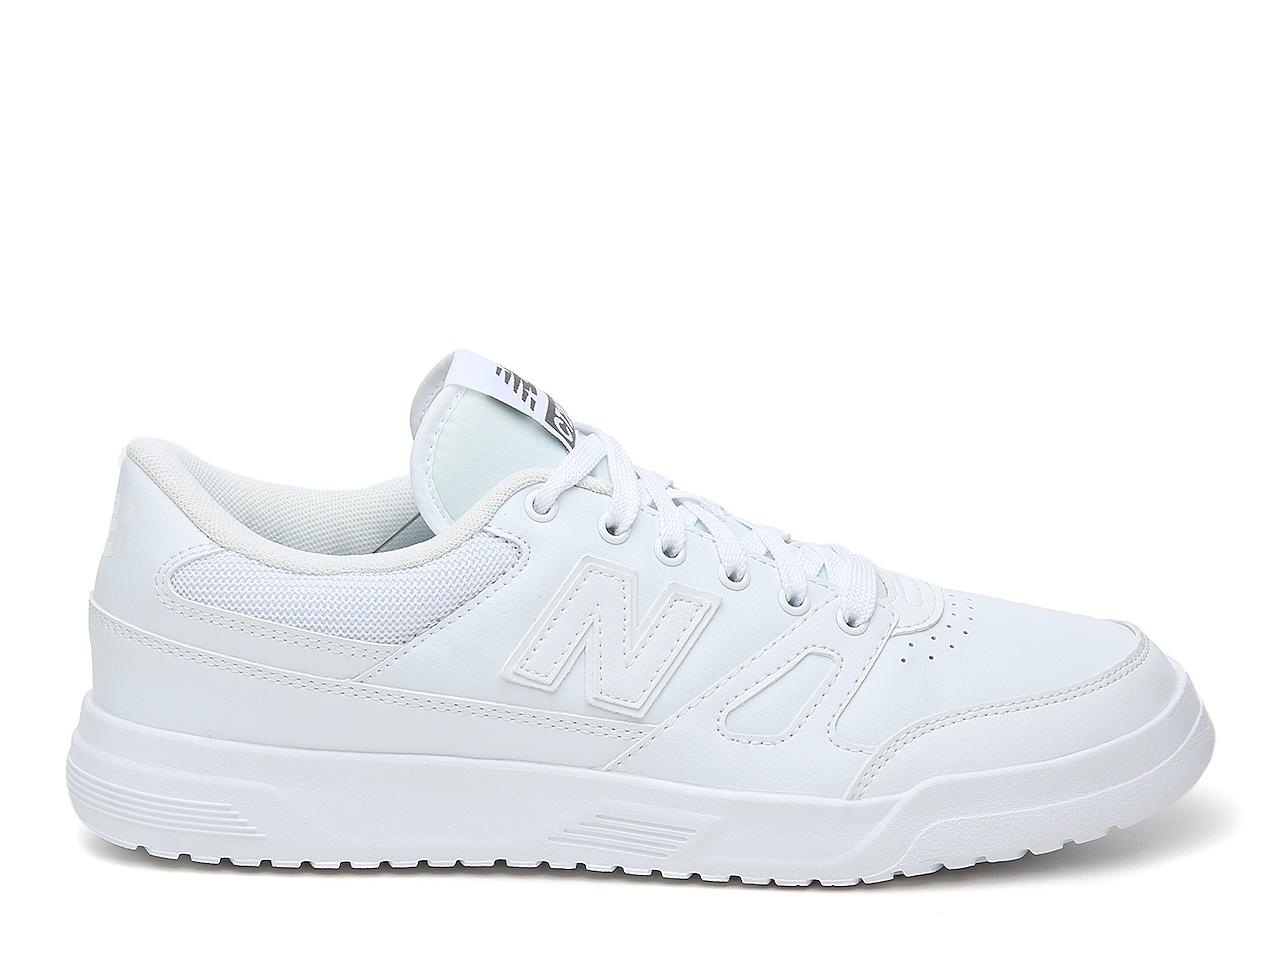 New Balance Ct20 Sneaker in White/White (White) for Men - Save 43% | Lyst